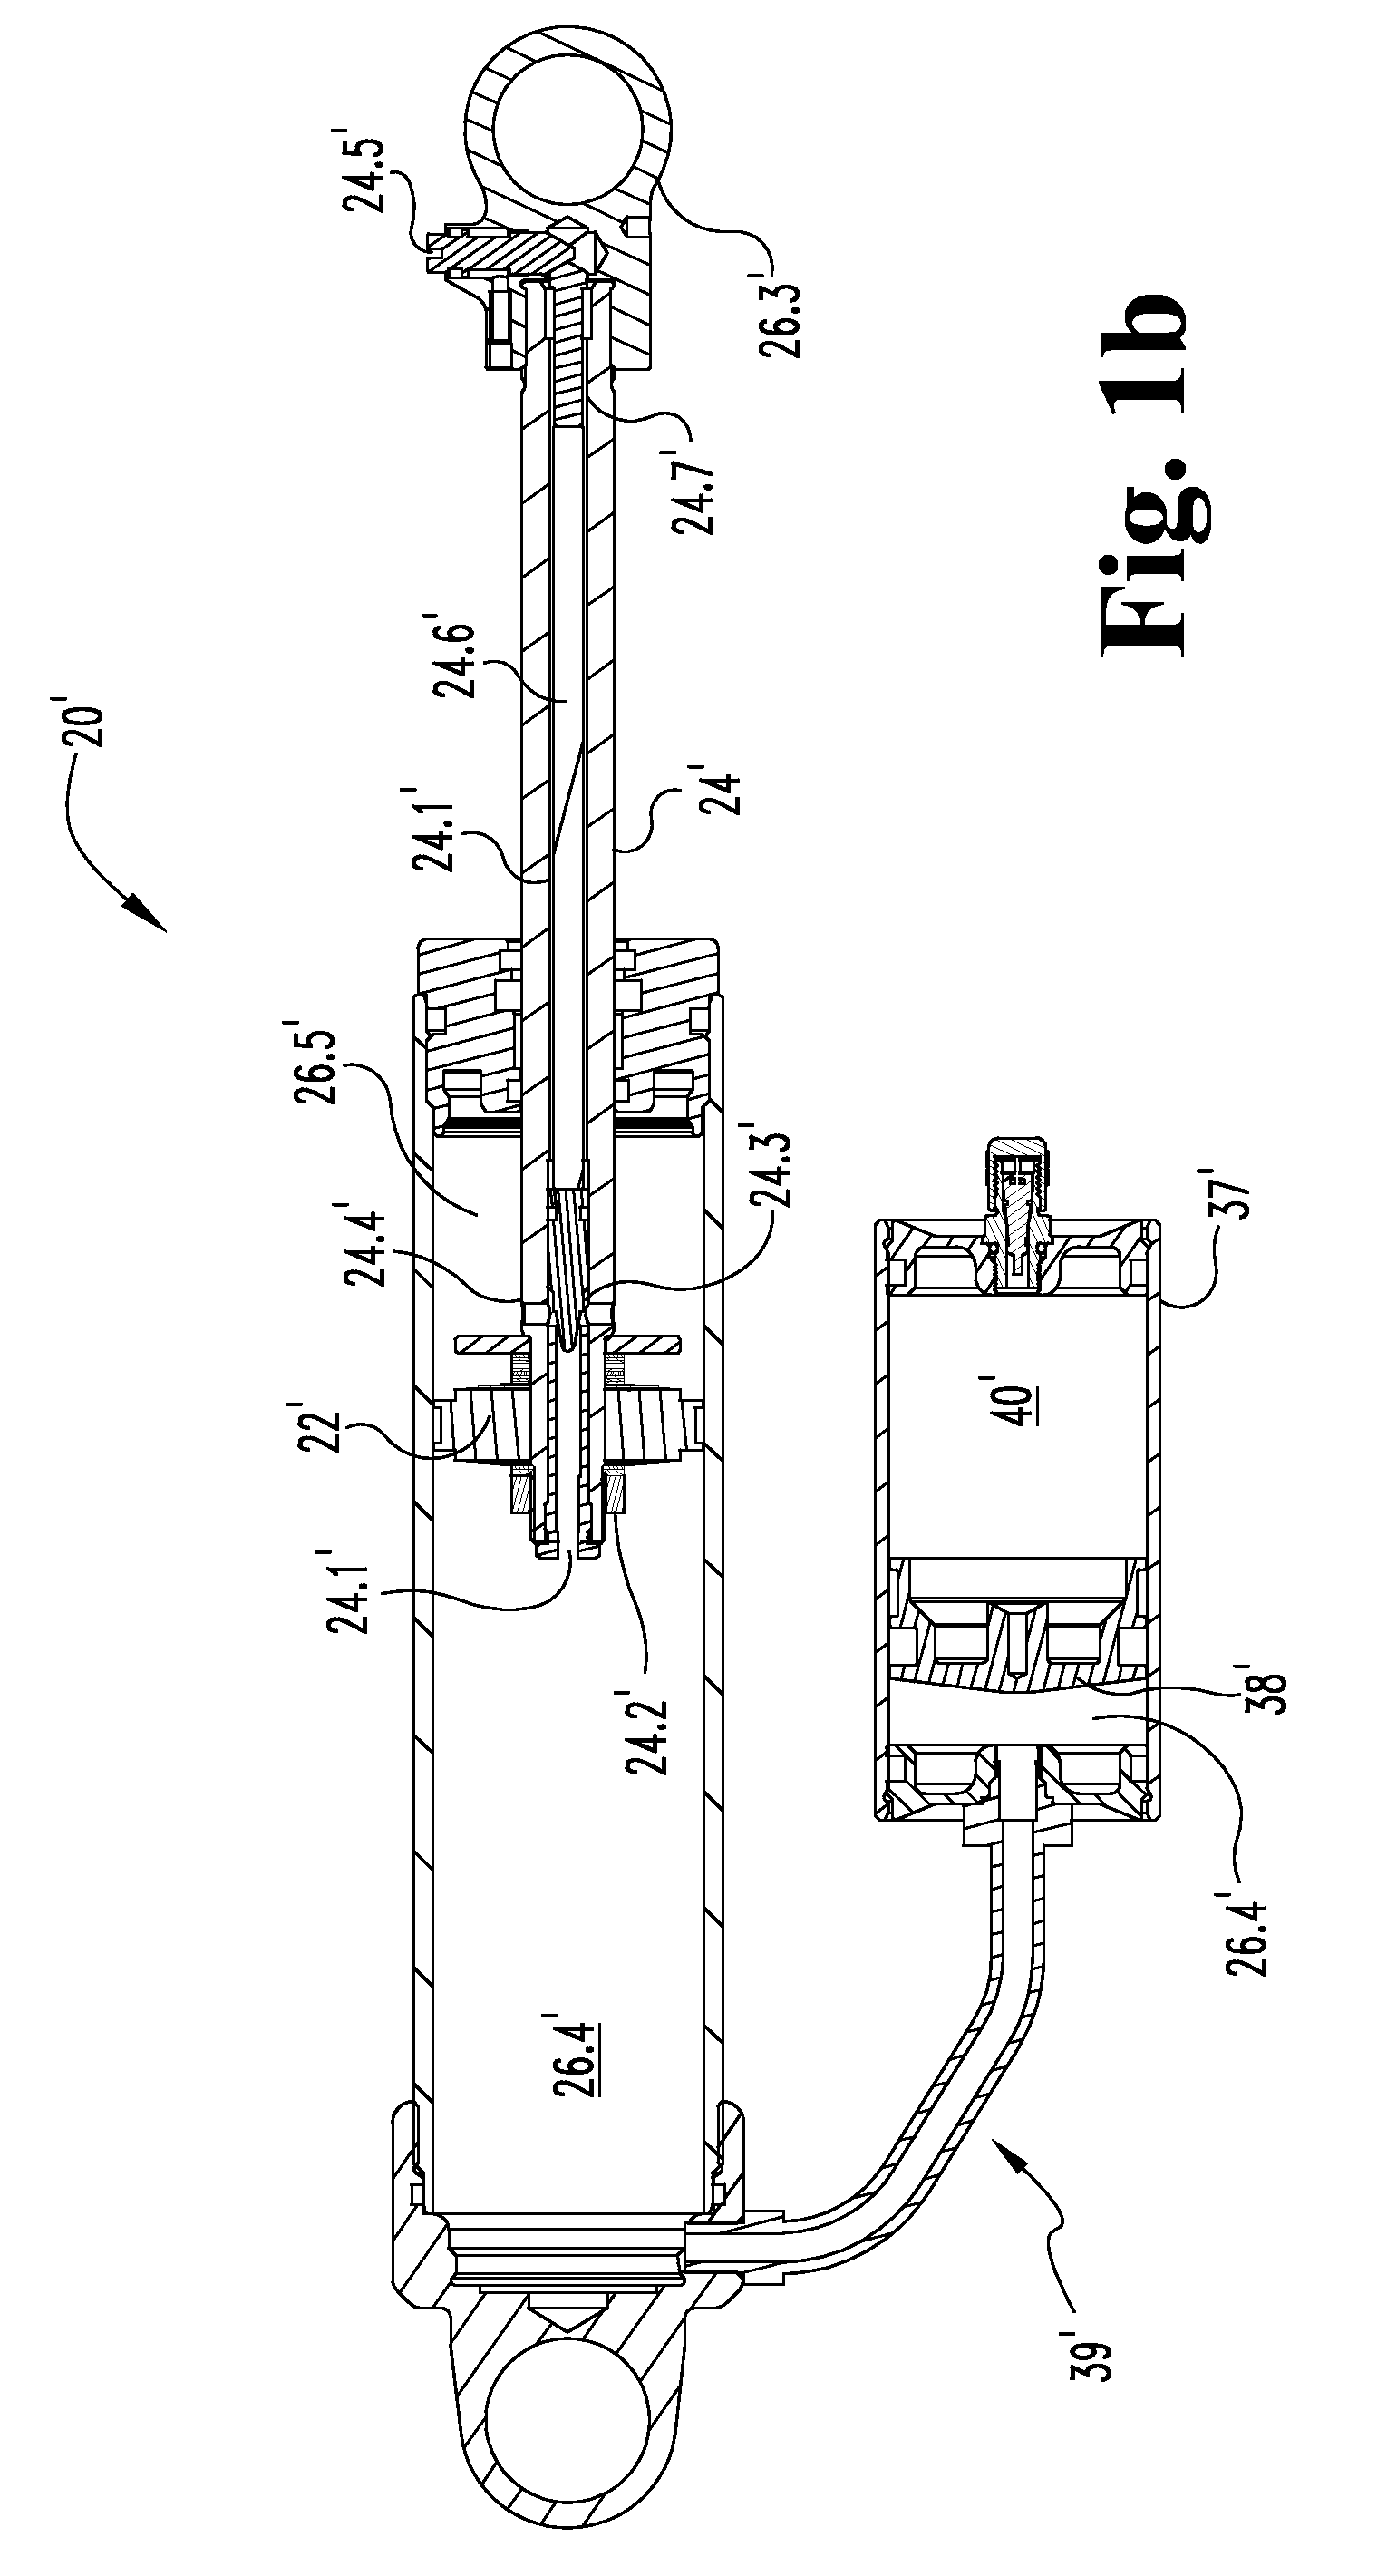 Methods and Apparatus for Developing a Vehicle Suspension